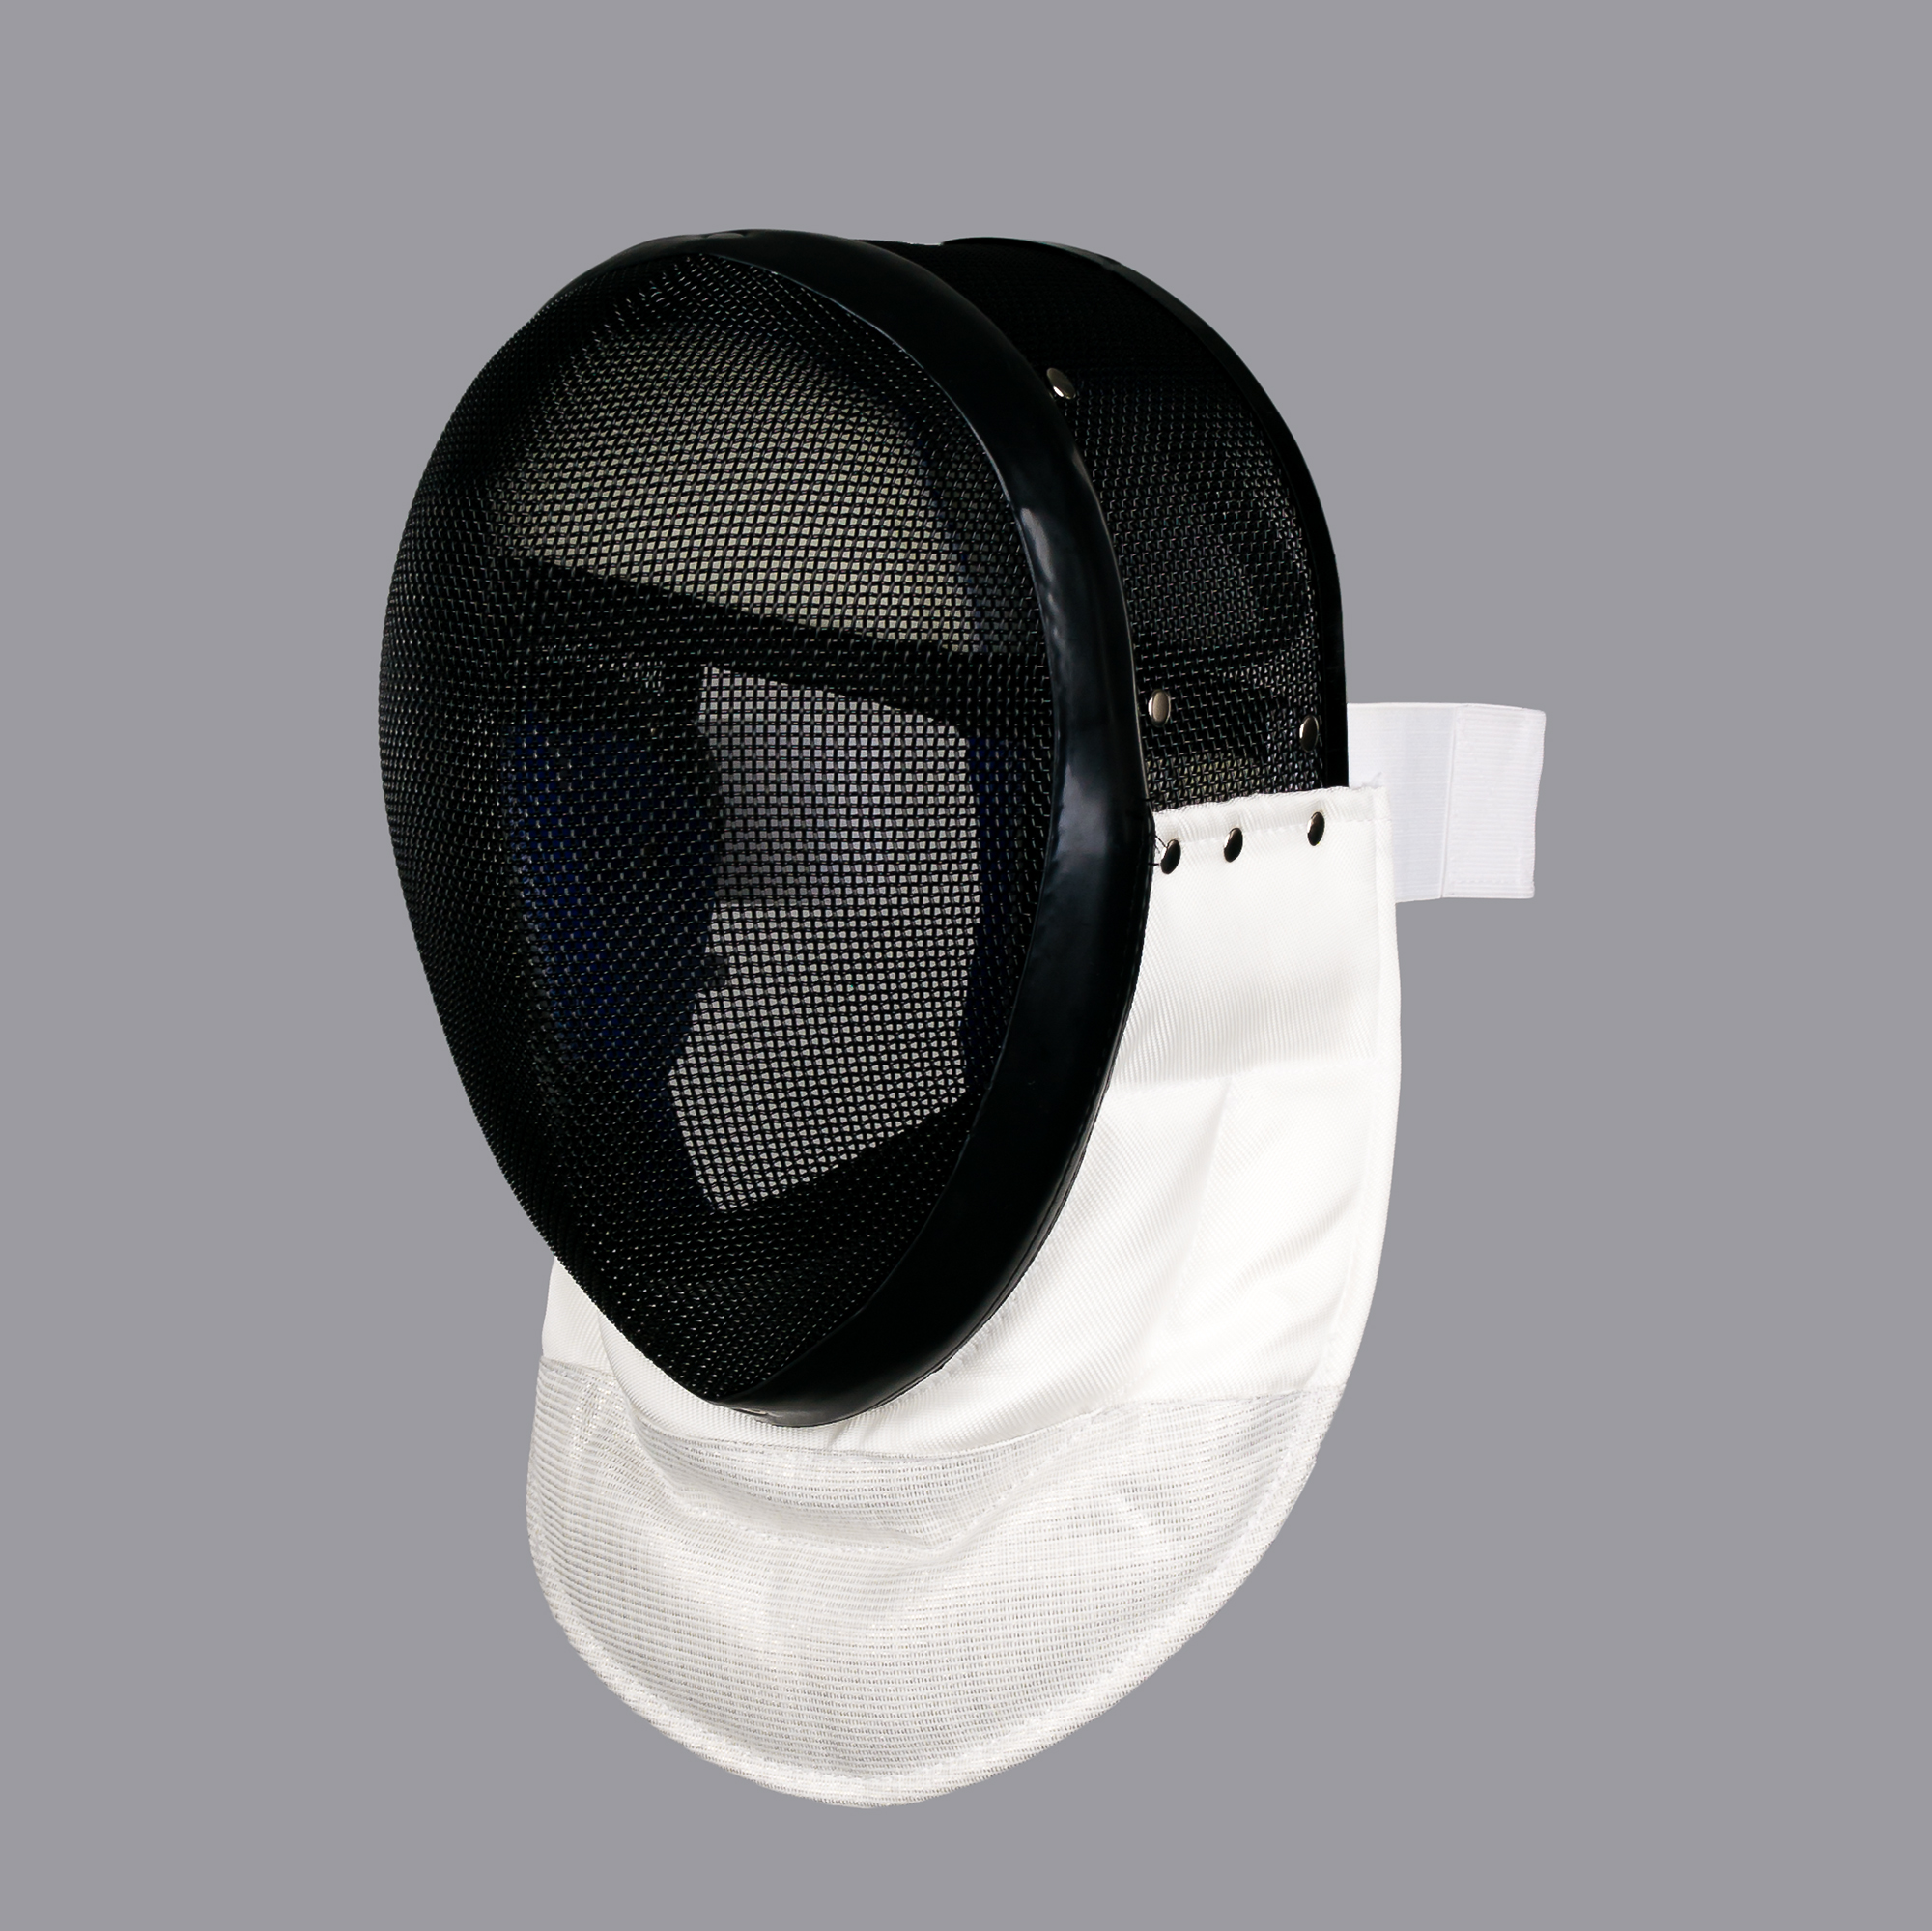 Epee Mask Conductive bib 350 newtons Size SMALL Fencing Foil 